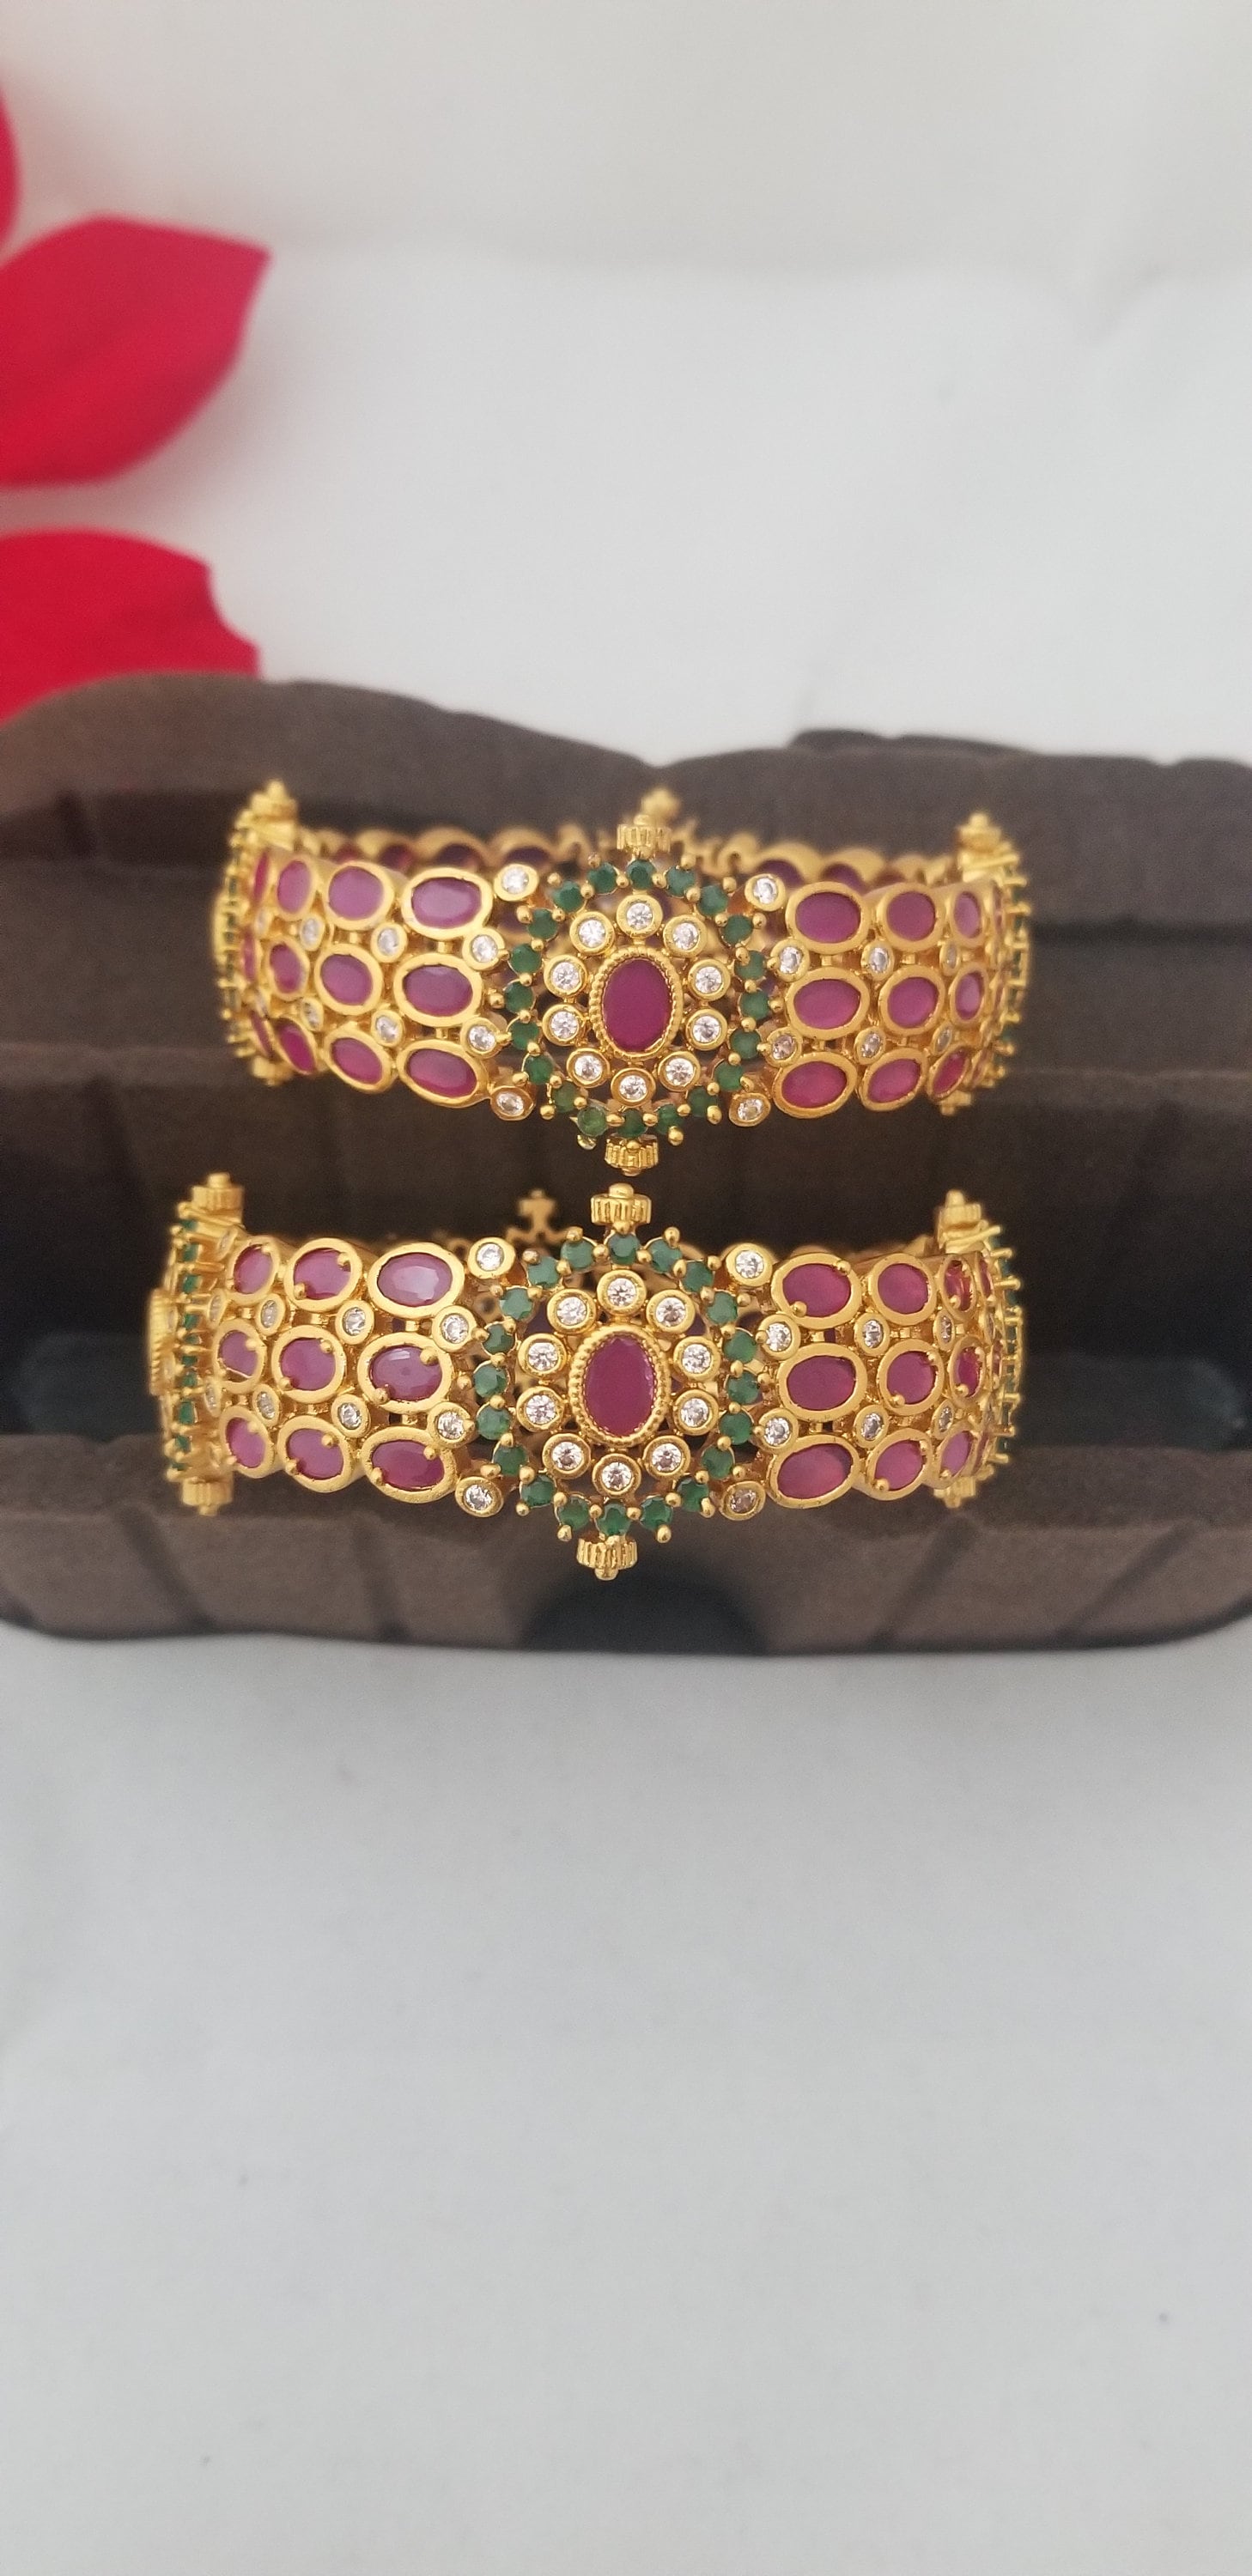 Premium Quality CZ Gold finish with Multi-color stone work grand bangles - Set of 2 bangles - Size 2.6